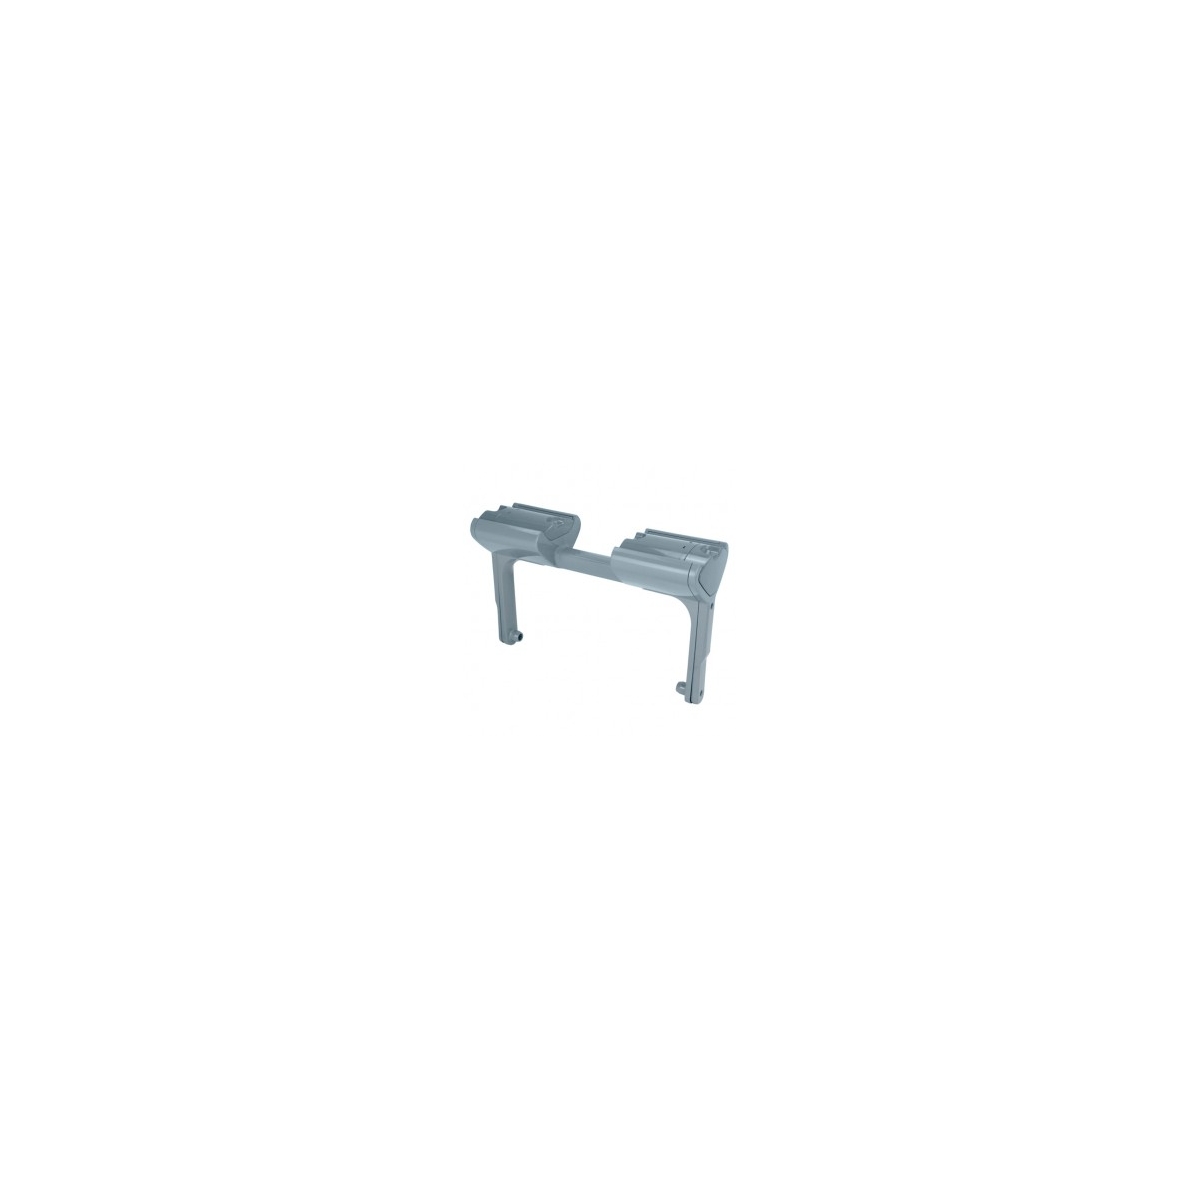 Dolphin Explorer Acuarius pool cleaner handle 99957084-ASSY